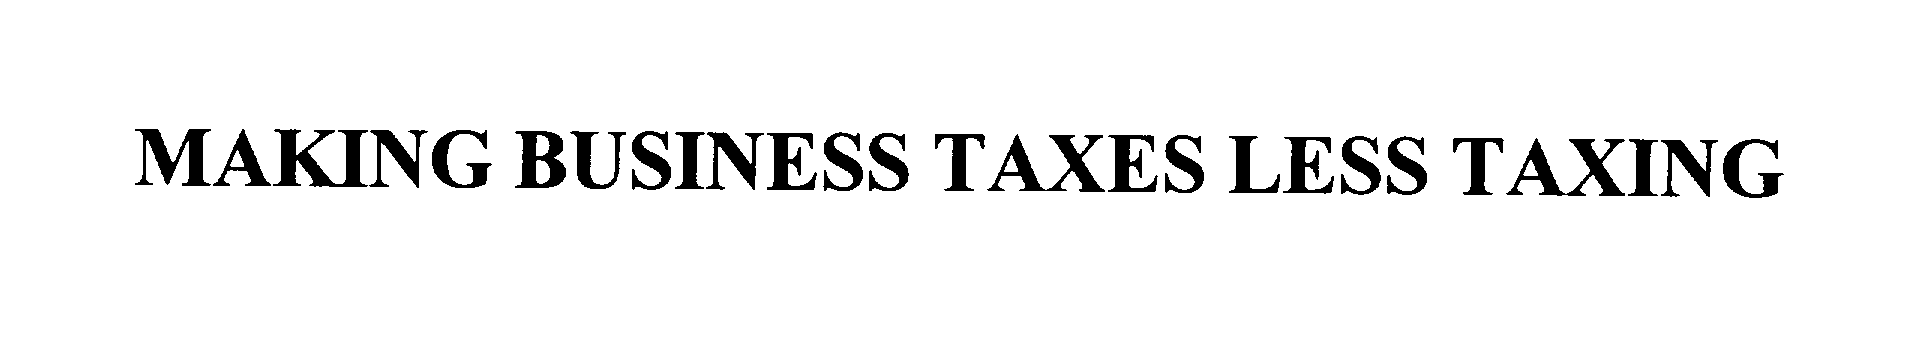 MAKING BUSINESS TAXES LESS TAXING